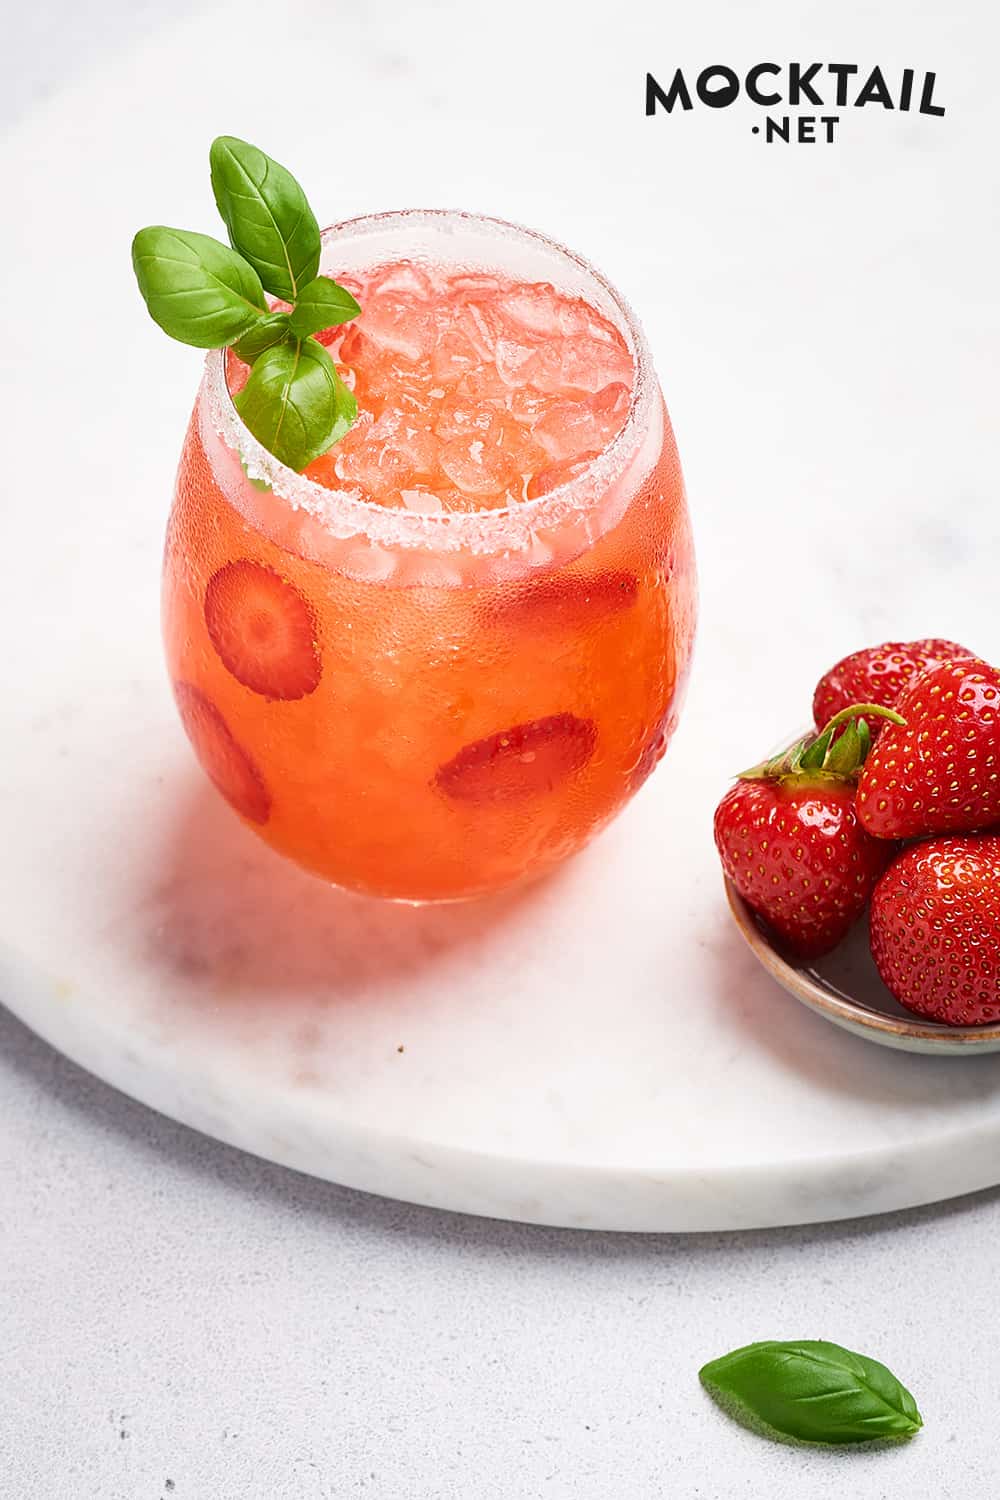 How To Make a Strawberry Mocktail with Basil